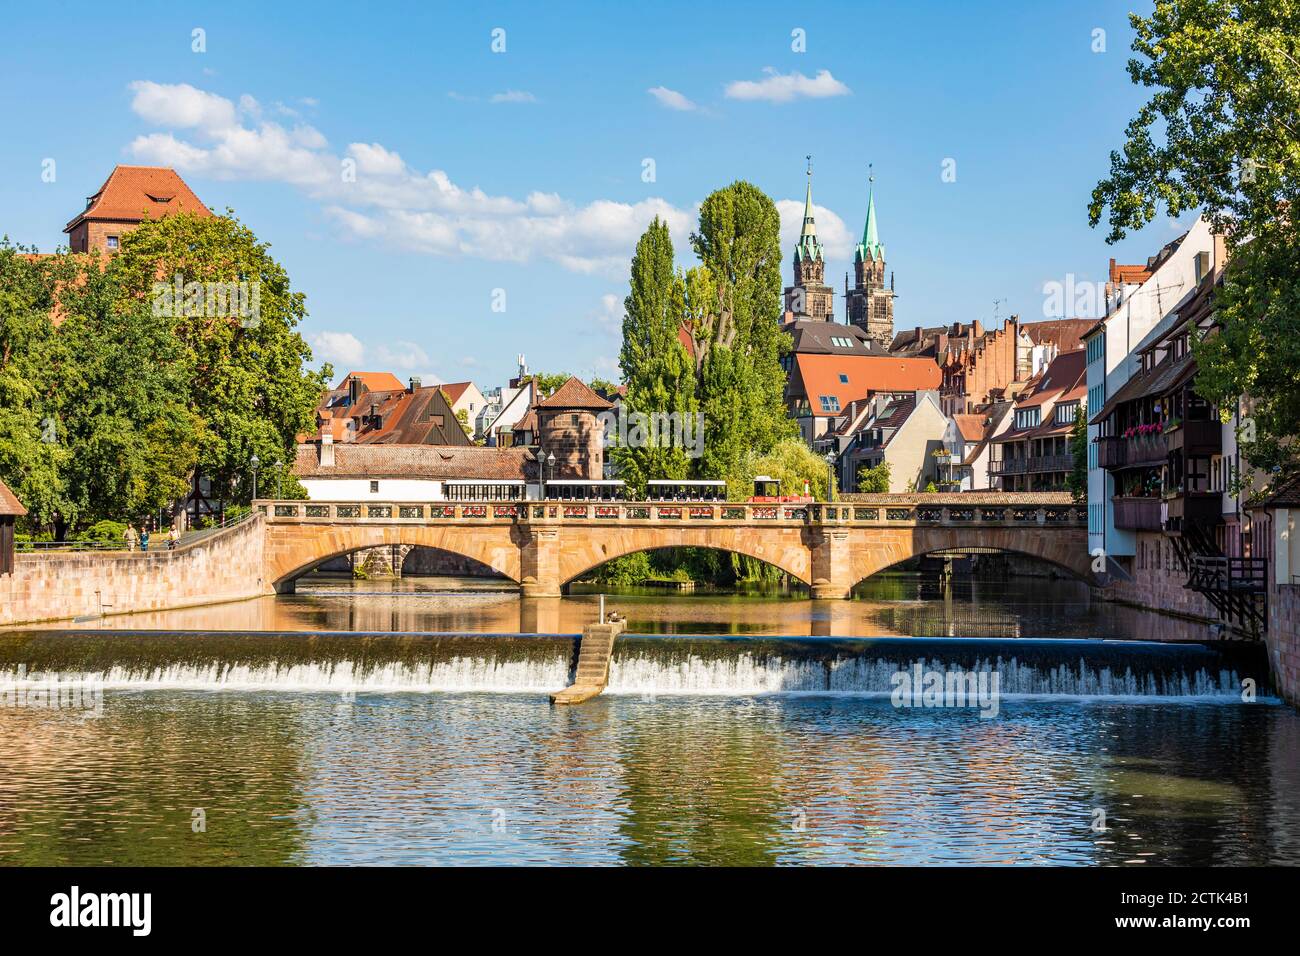 Germany, Bavaria, Nuremberg, Maxbrucke with old town buildings in background Stock Photo